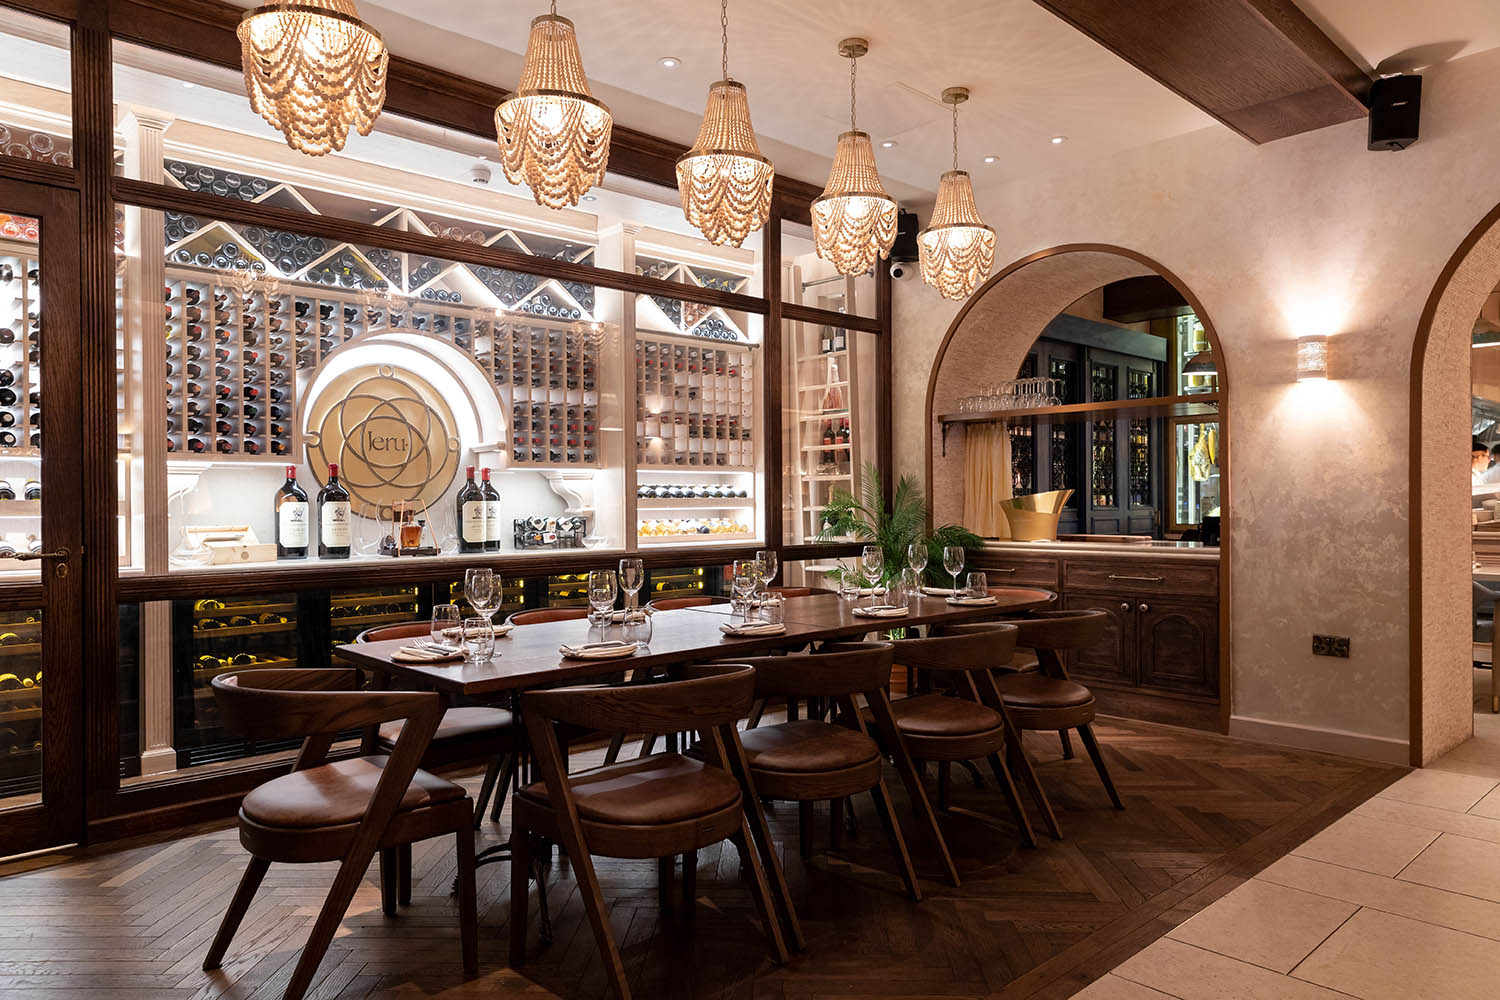 Woodbender dining chairs in Jeru restaurant London. Woodbender dining chairs and stools are available via Sarza furniture store in Rye, New York. 